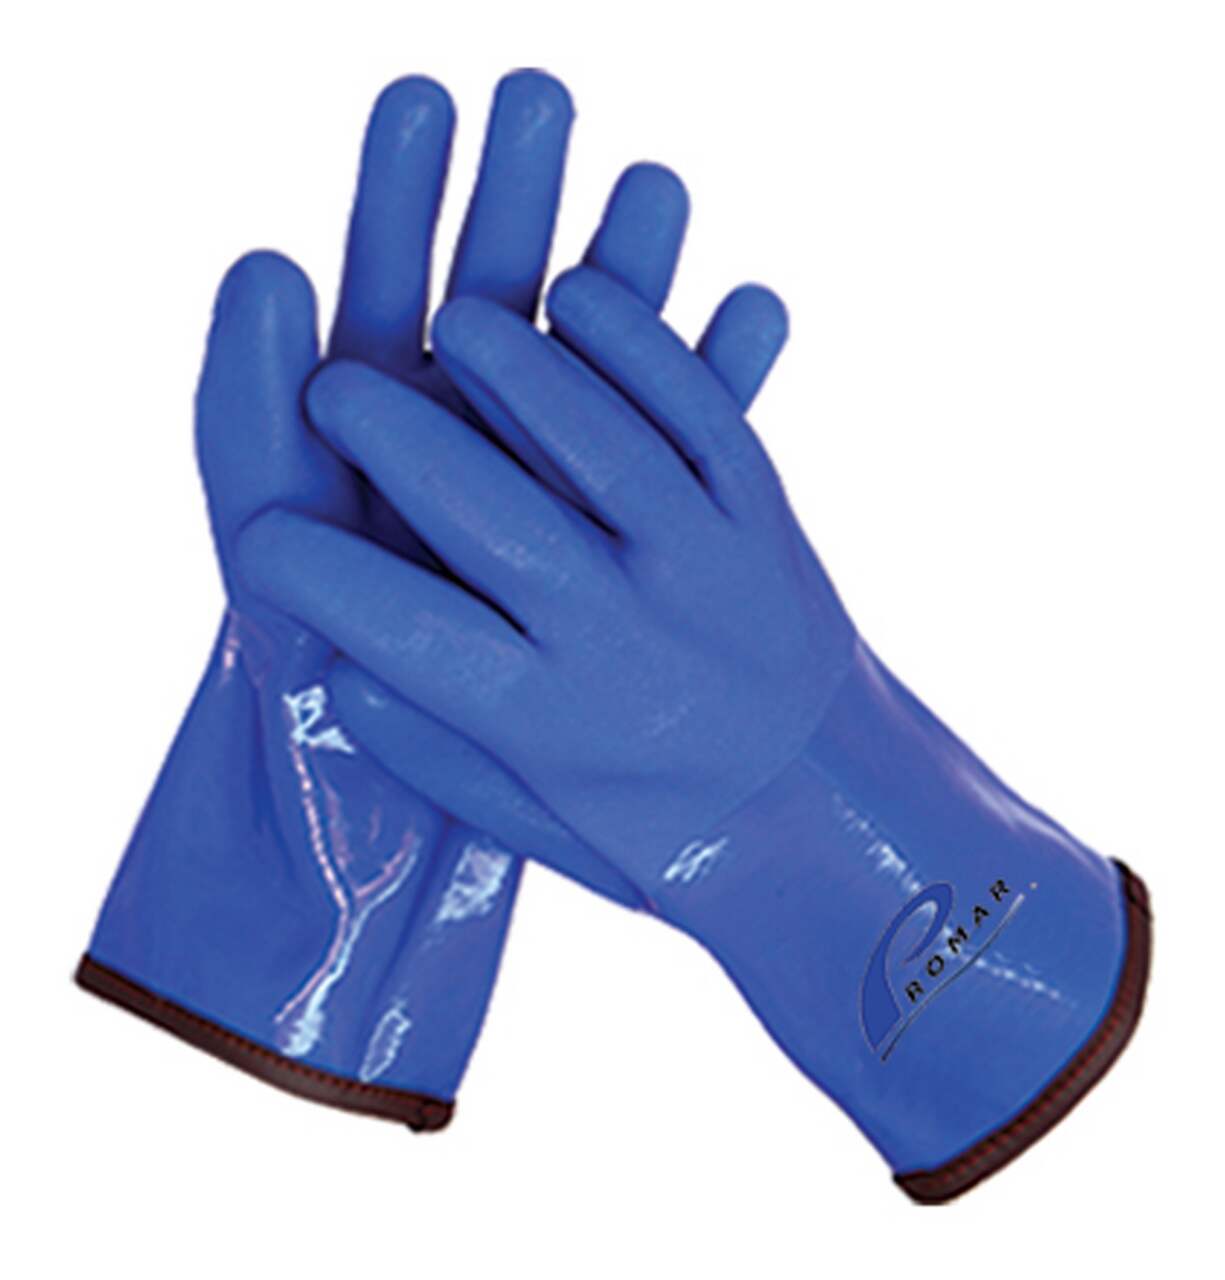 https://media-www.canadiantire.ca/product/playing/fishing/ice-fishing/0771801/promar-insulated-pro-grip-gloves-xl-blue-dbc8f0fe-d2ff-4611-b18c-e311210a2729.png?imdensity=1&imwidth=1244&impolicy=mZoom